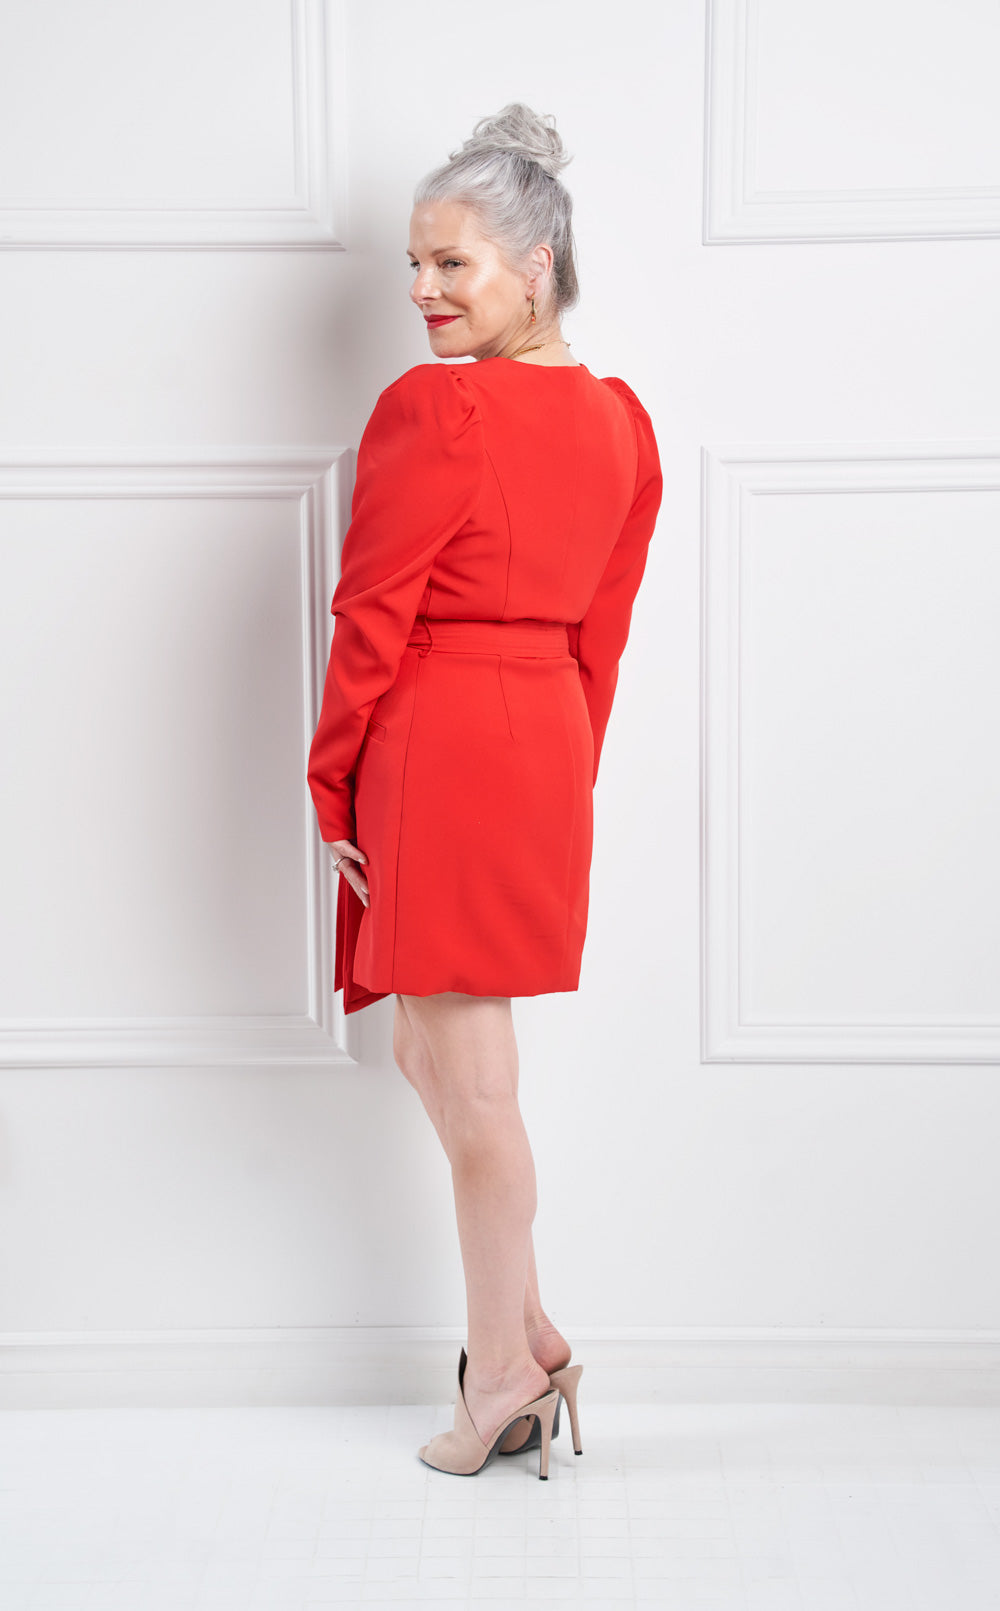 Robe Courte Rouge - Location